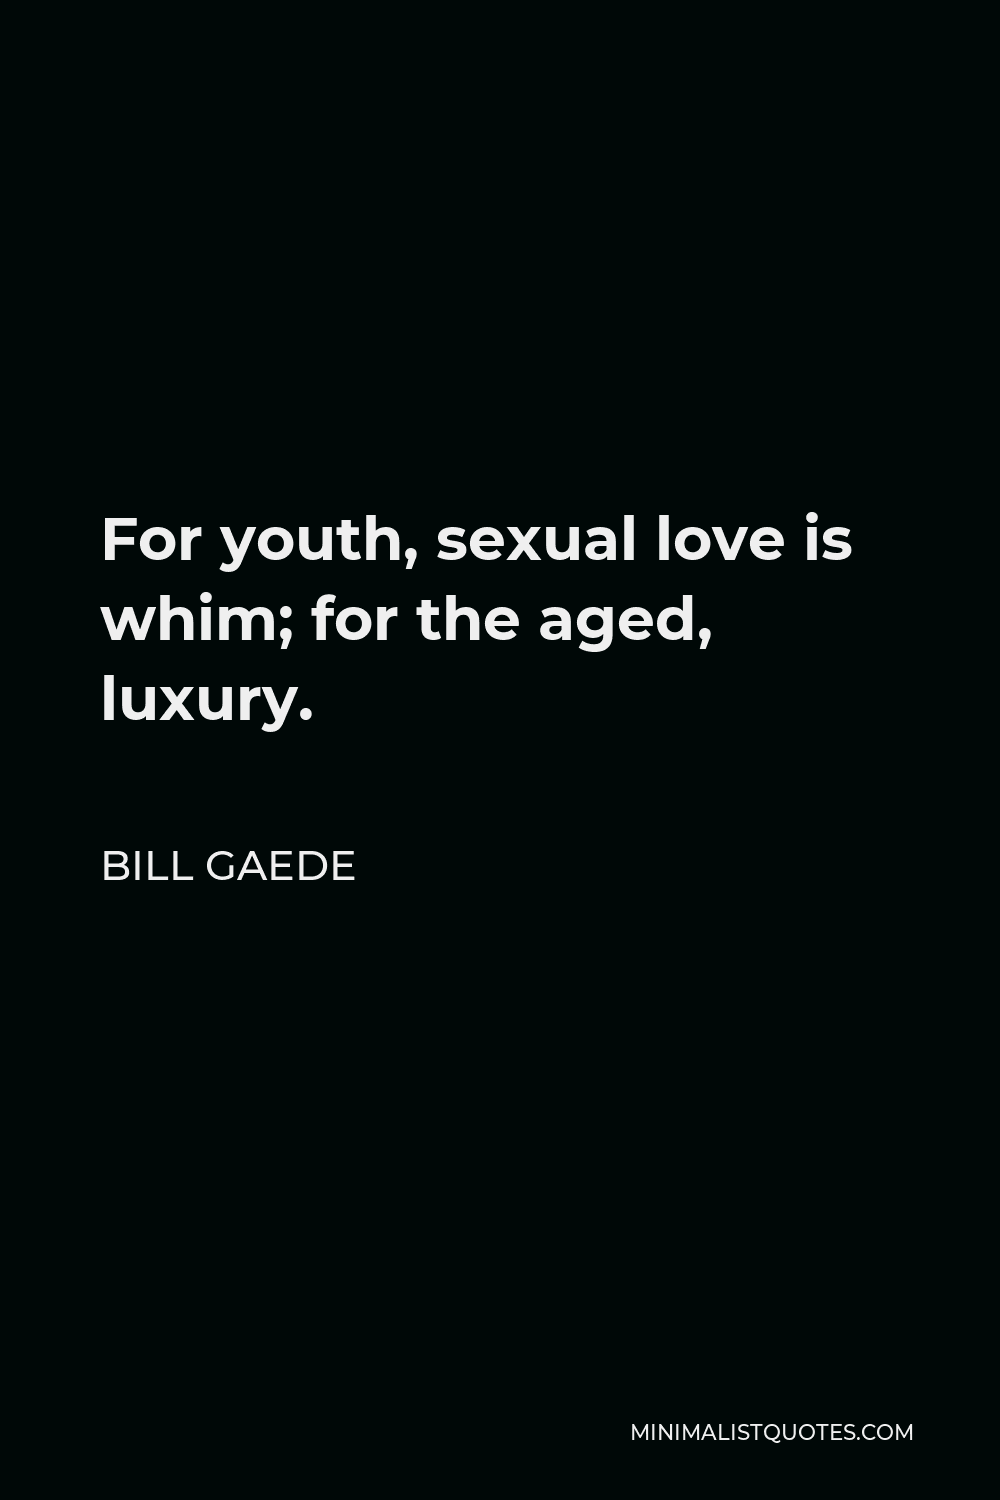 Bill Gaede Quote - For youth, sexual love is whim; for the aged, luxury.